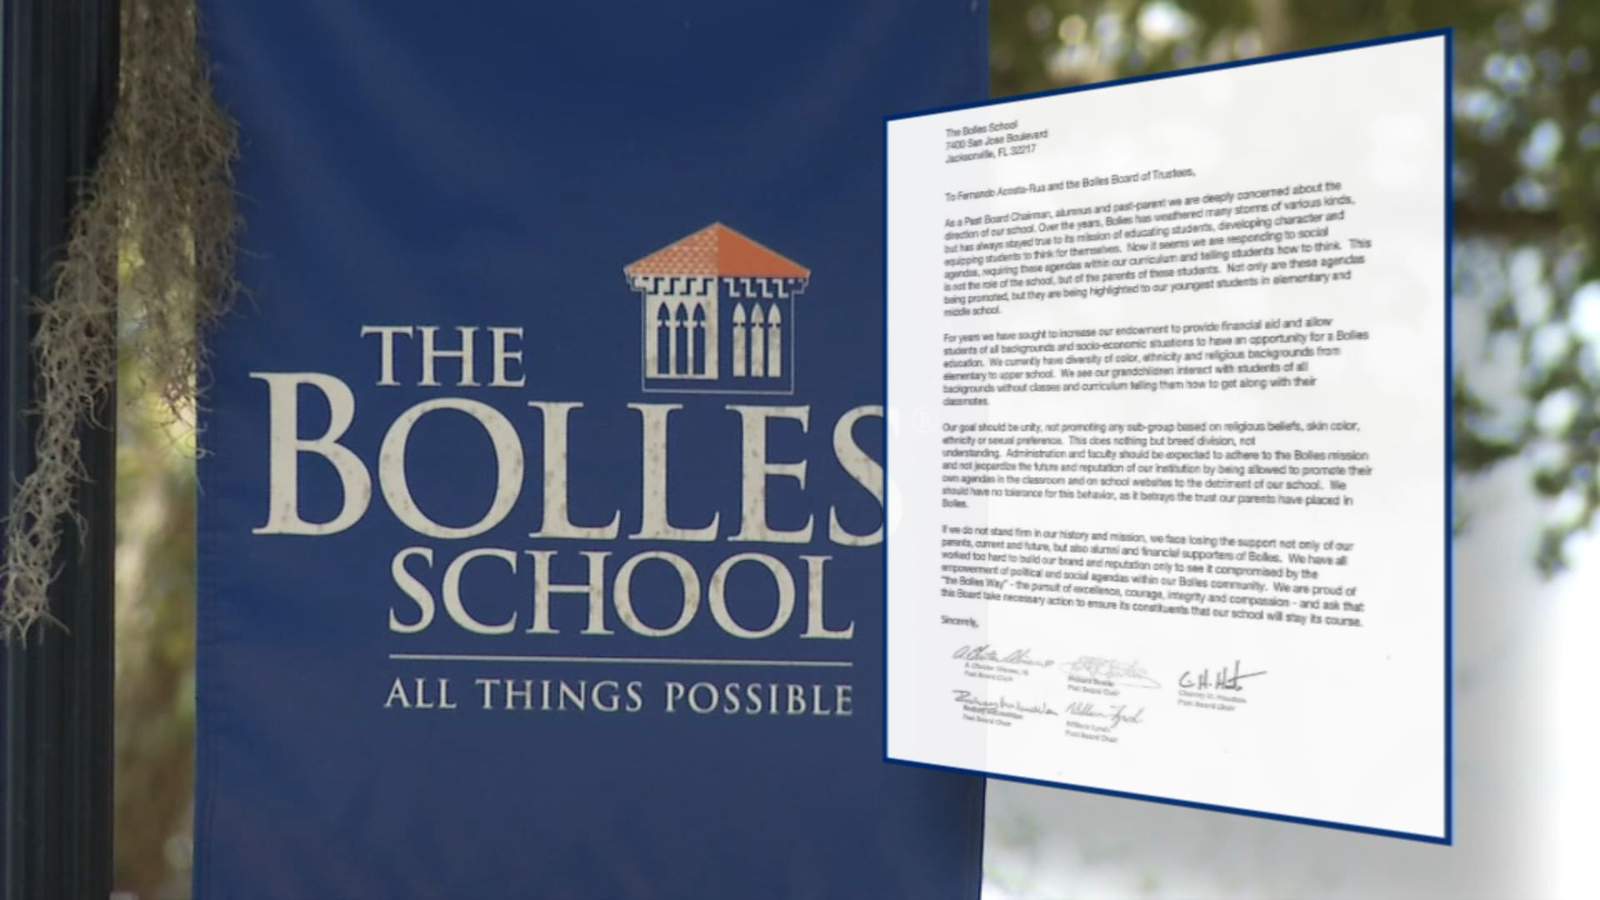 Donors pressured Jacksonville private school to drop diversity curriculum